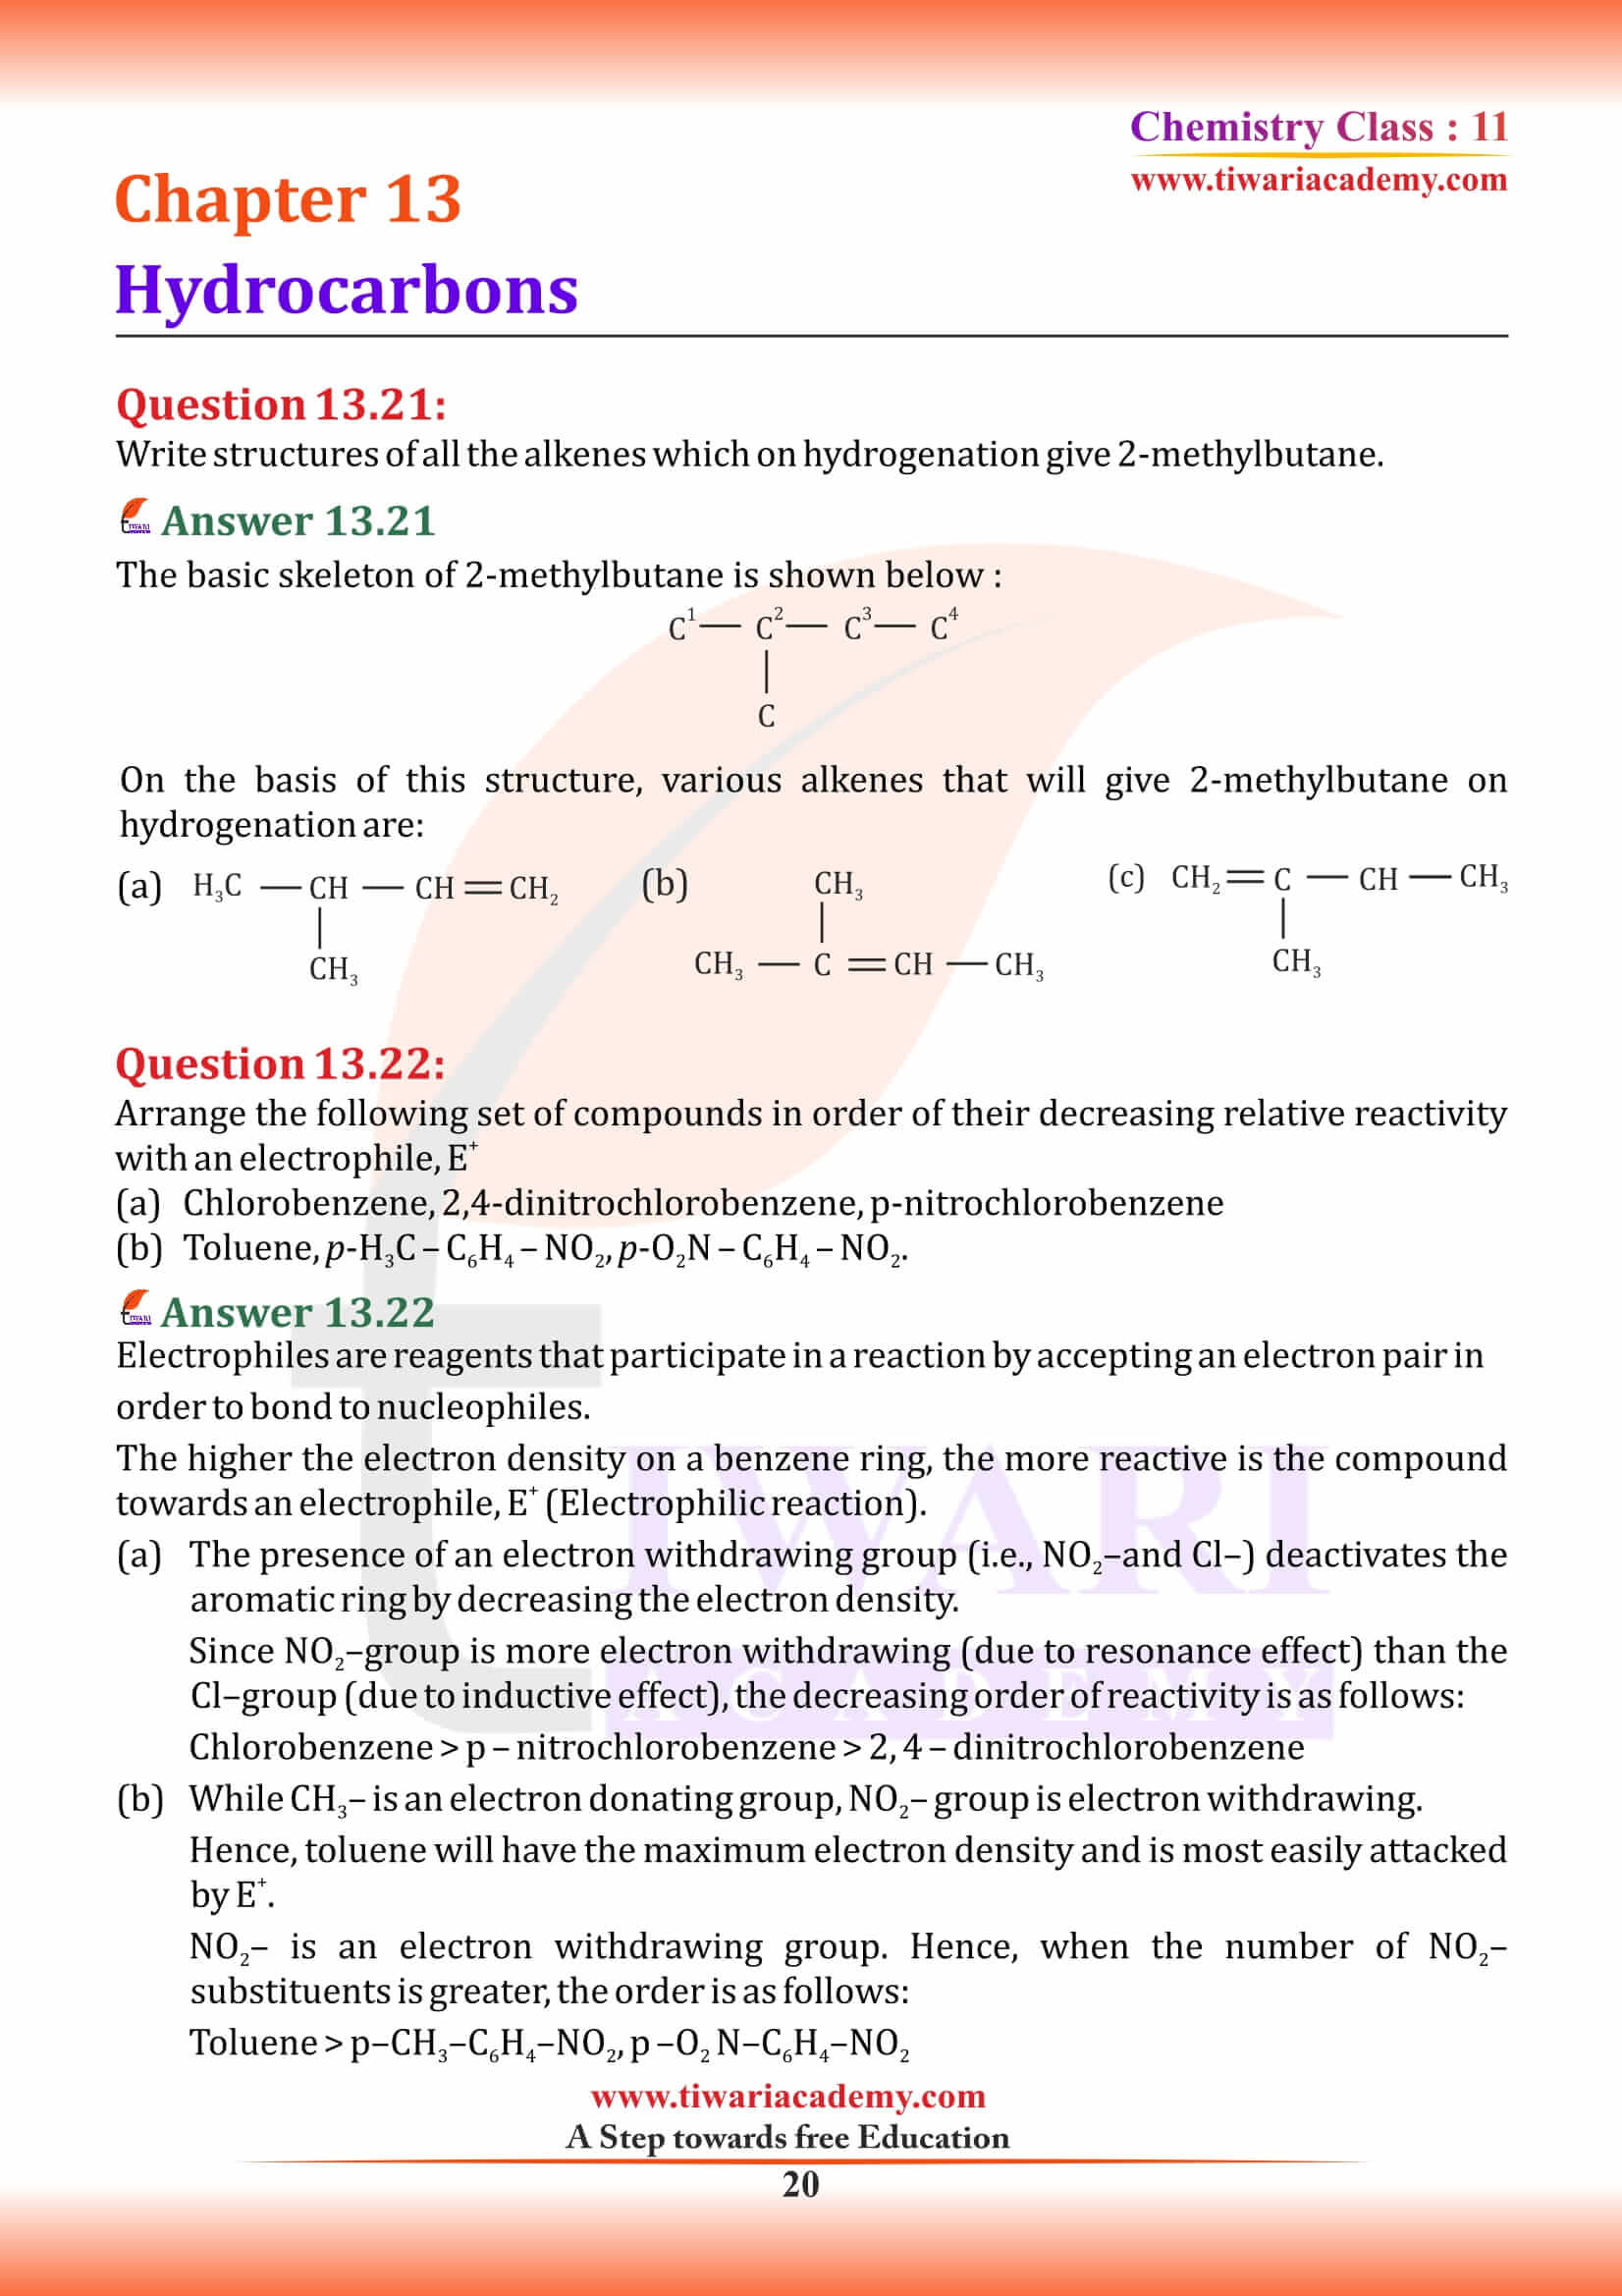 Class 11 Chemistry Chapter 13 NCERT Solutions for State board